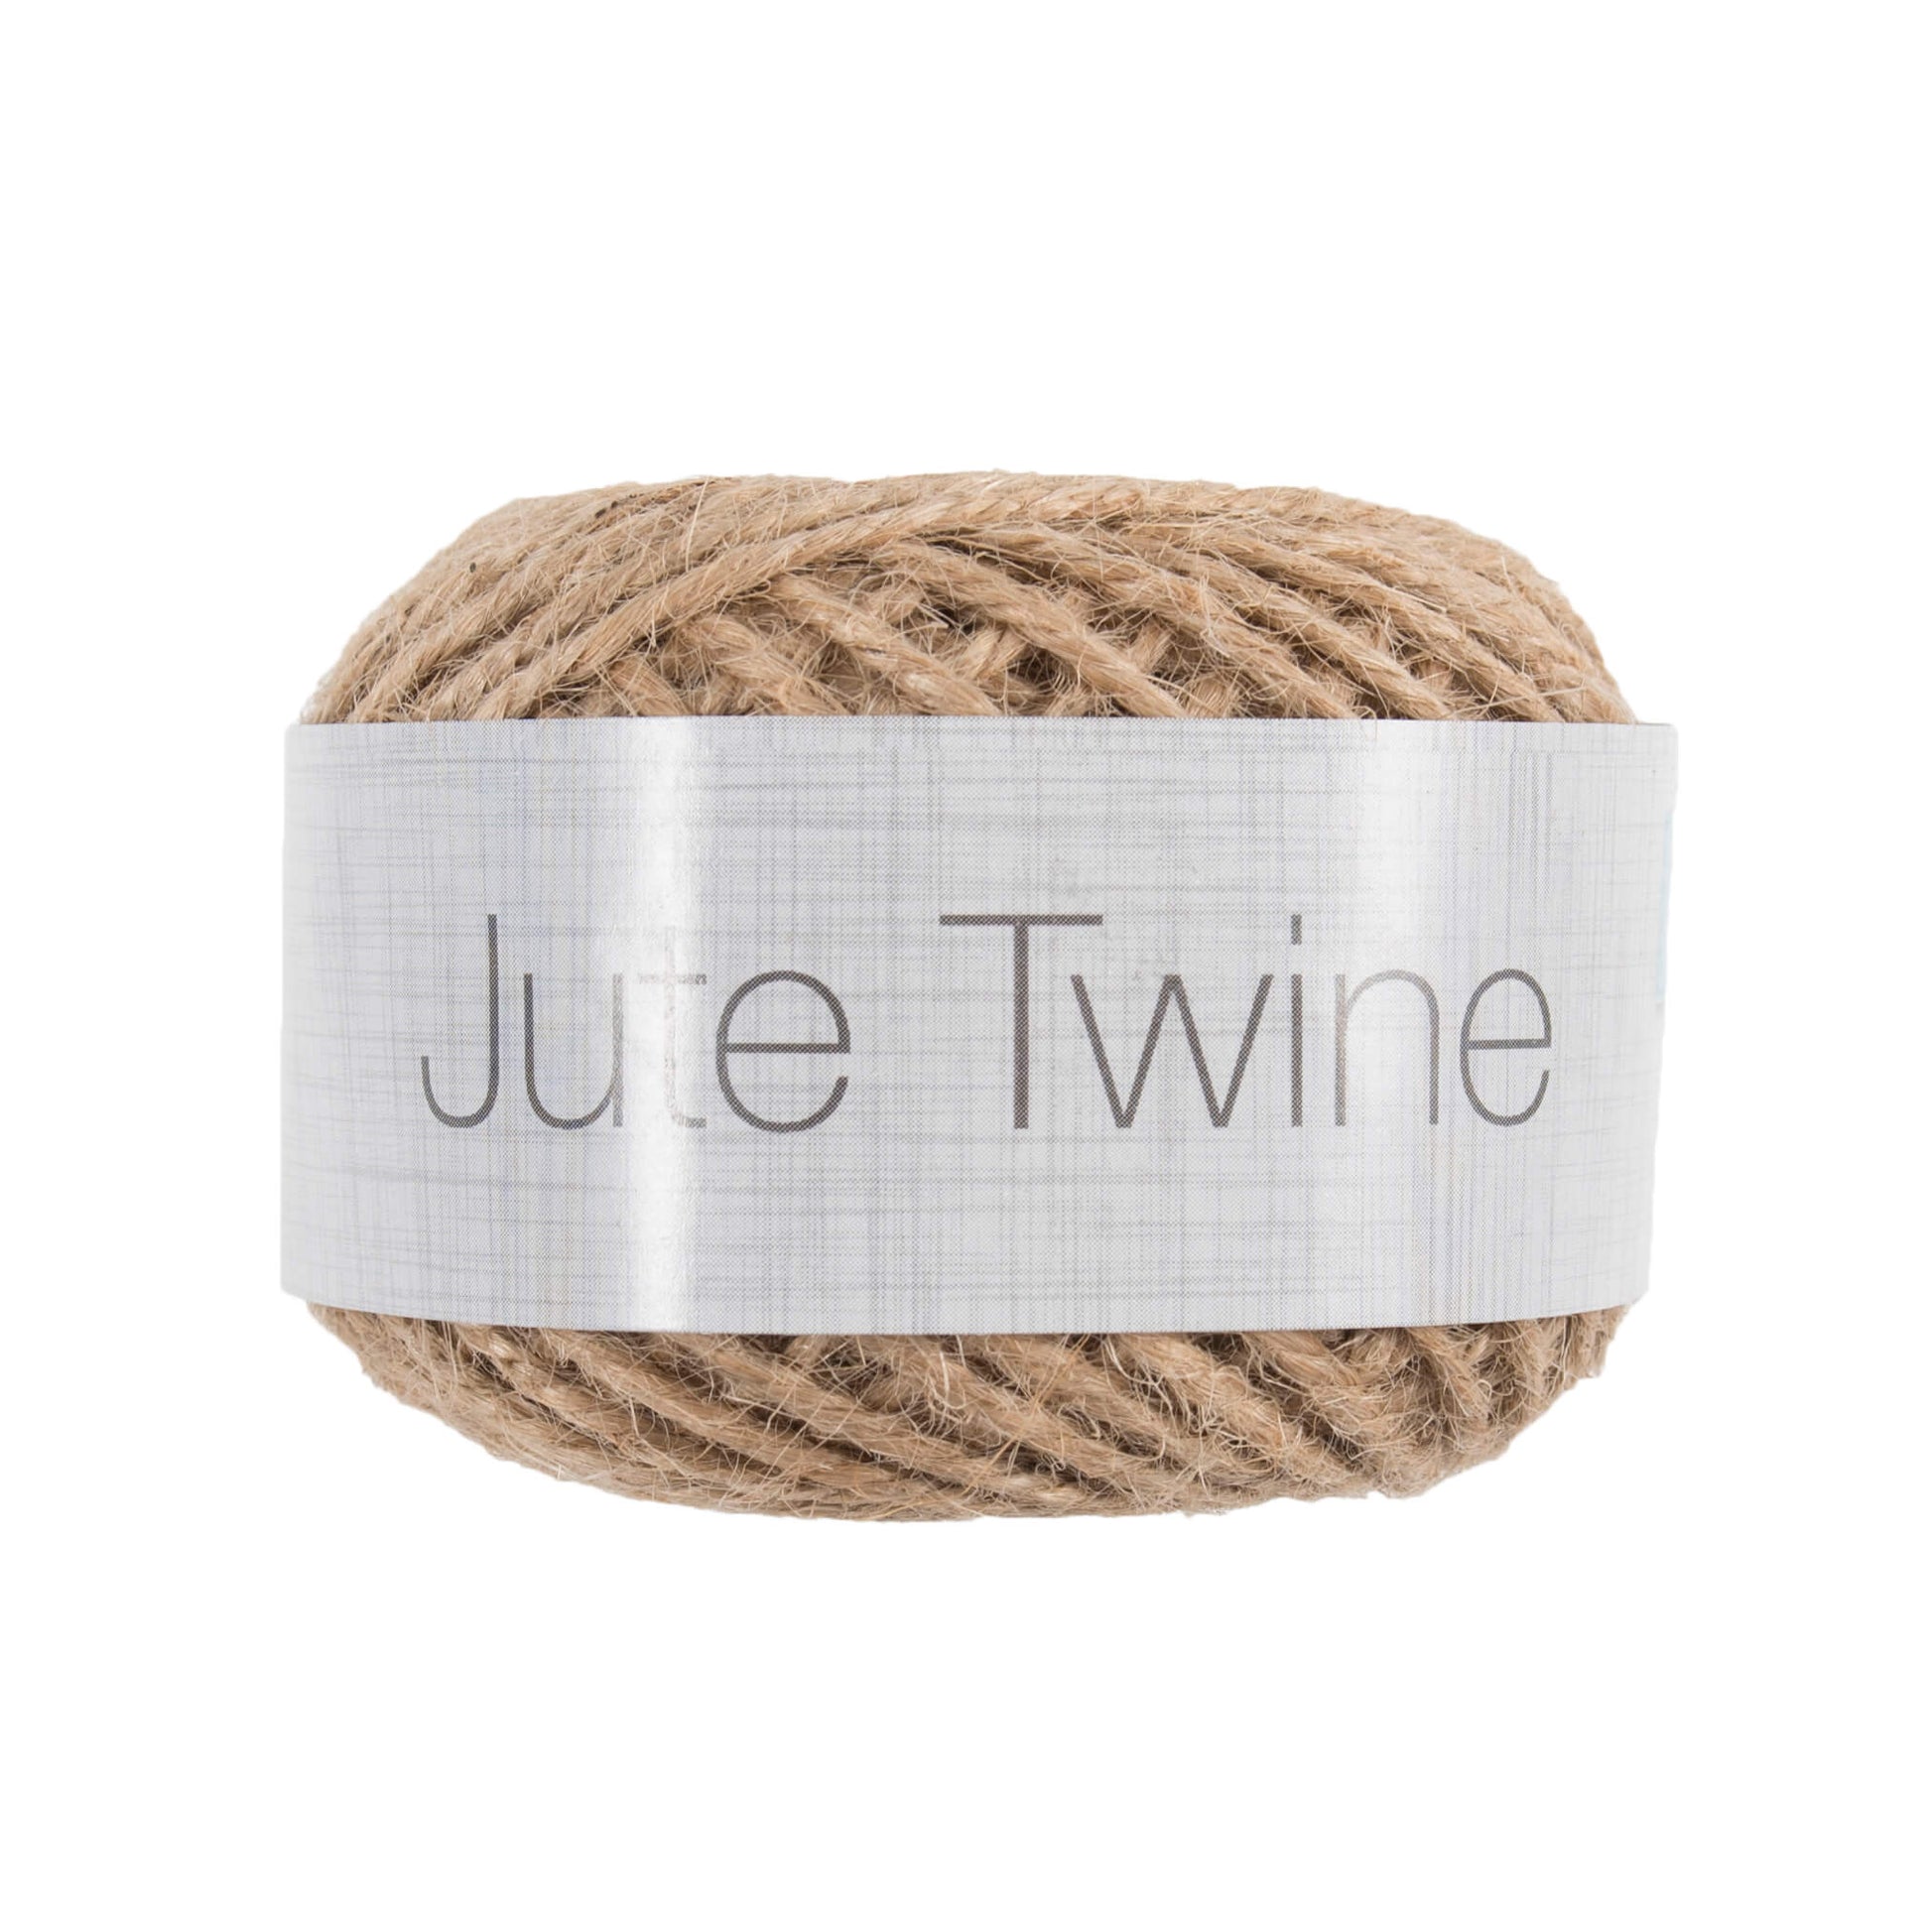 The image shows a ball of jute twine on a white background. Jute Twine is written in black text over a large grey band.